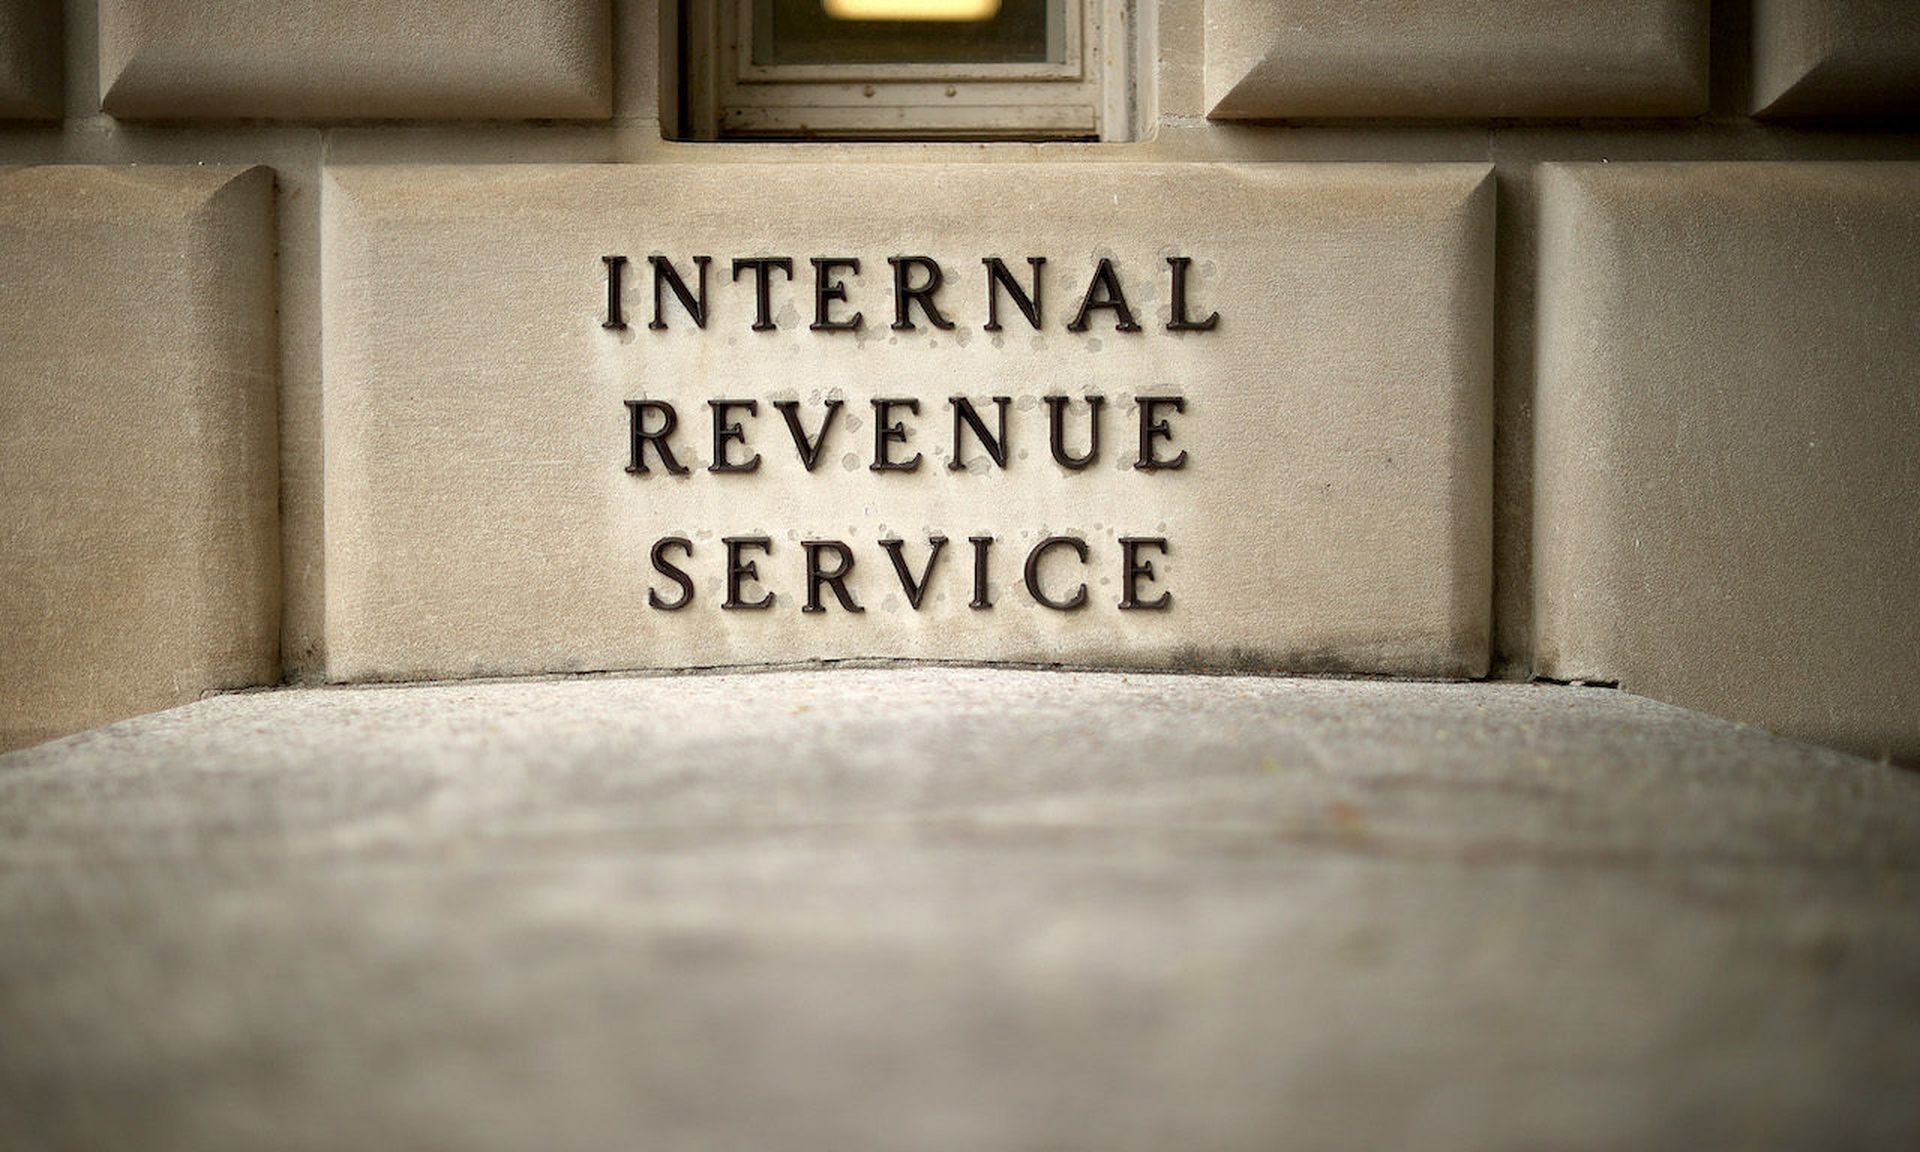 The Internal Revenue Service headquarters building in the Federal Triangle section of Washington, D.C. Among phishing schemes to emerge recently is one targeting university students with promises of tax refunds. (Photo by Chip Somodevilla/Getty Images)